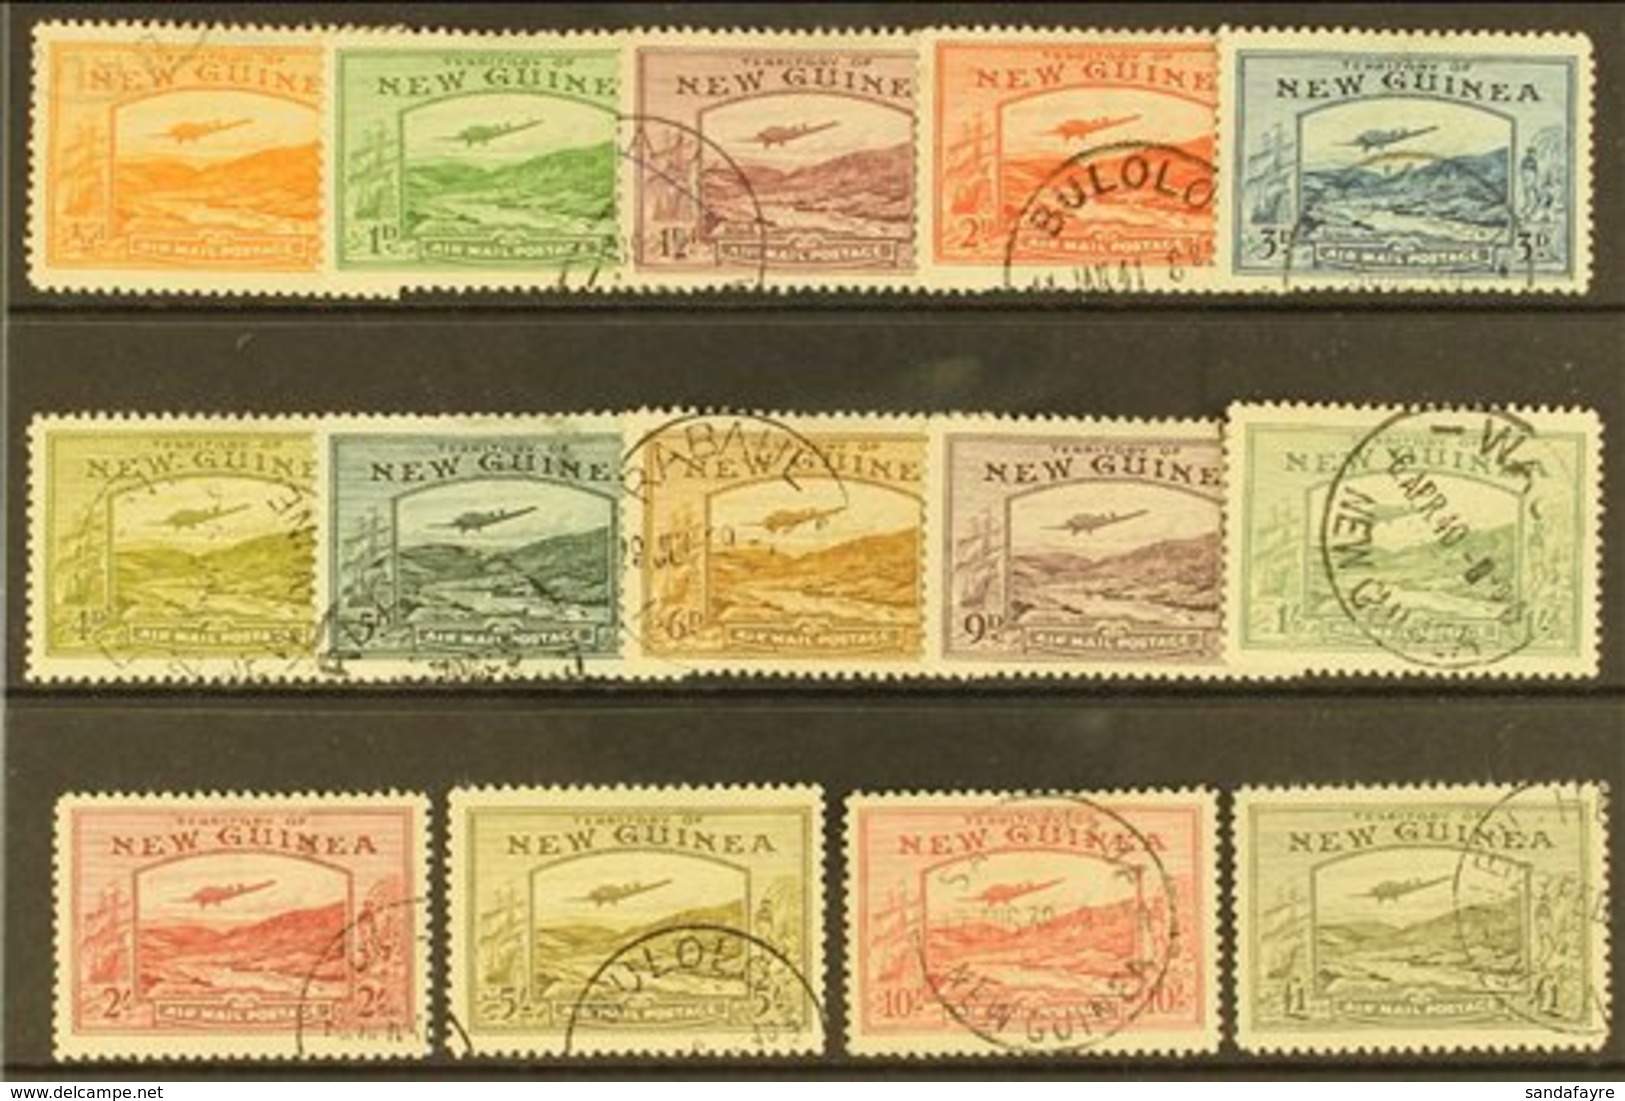 1939 AIRMAILS, Complete Set, SG 212/25, 5d & 2s With Some Light Marks, Otherwise Very Fine Used (14 Stamps). For More Im - Papúa Nueva Guinea